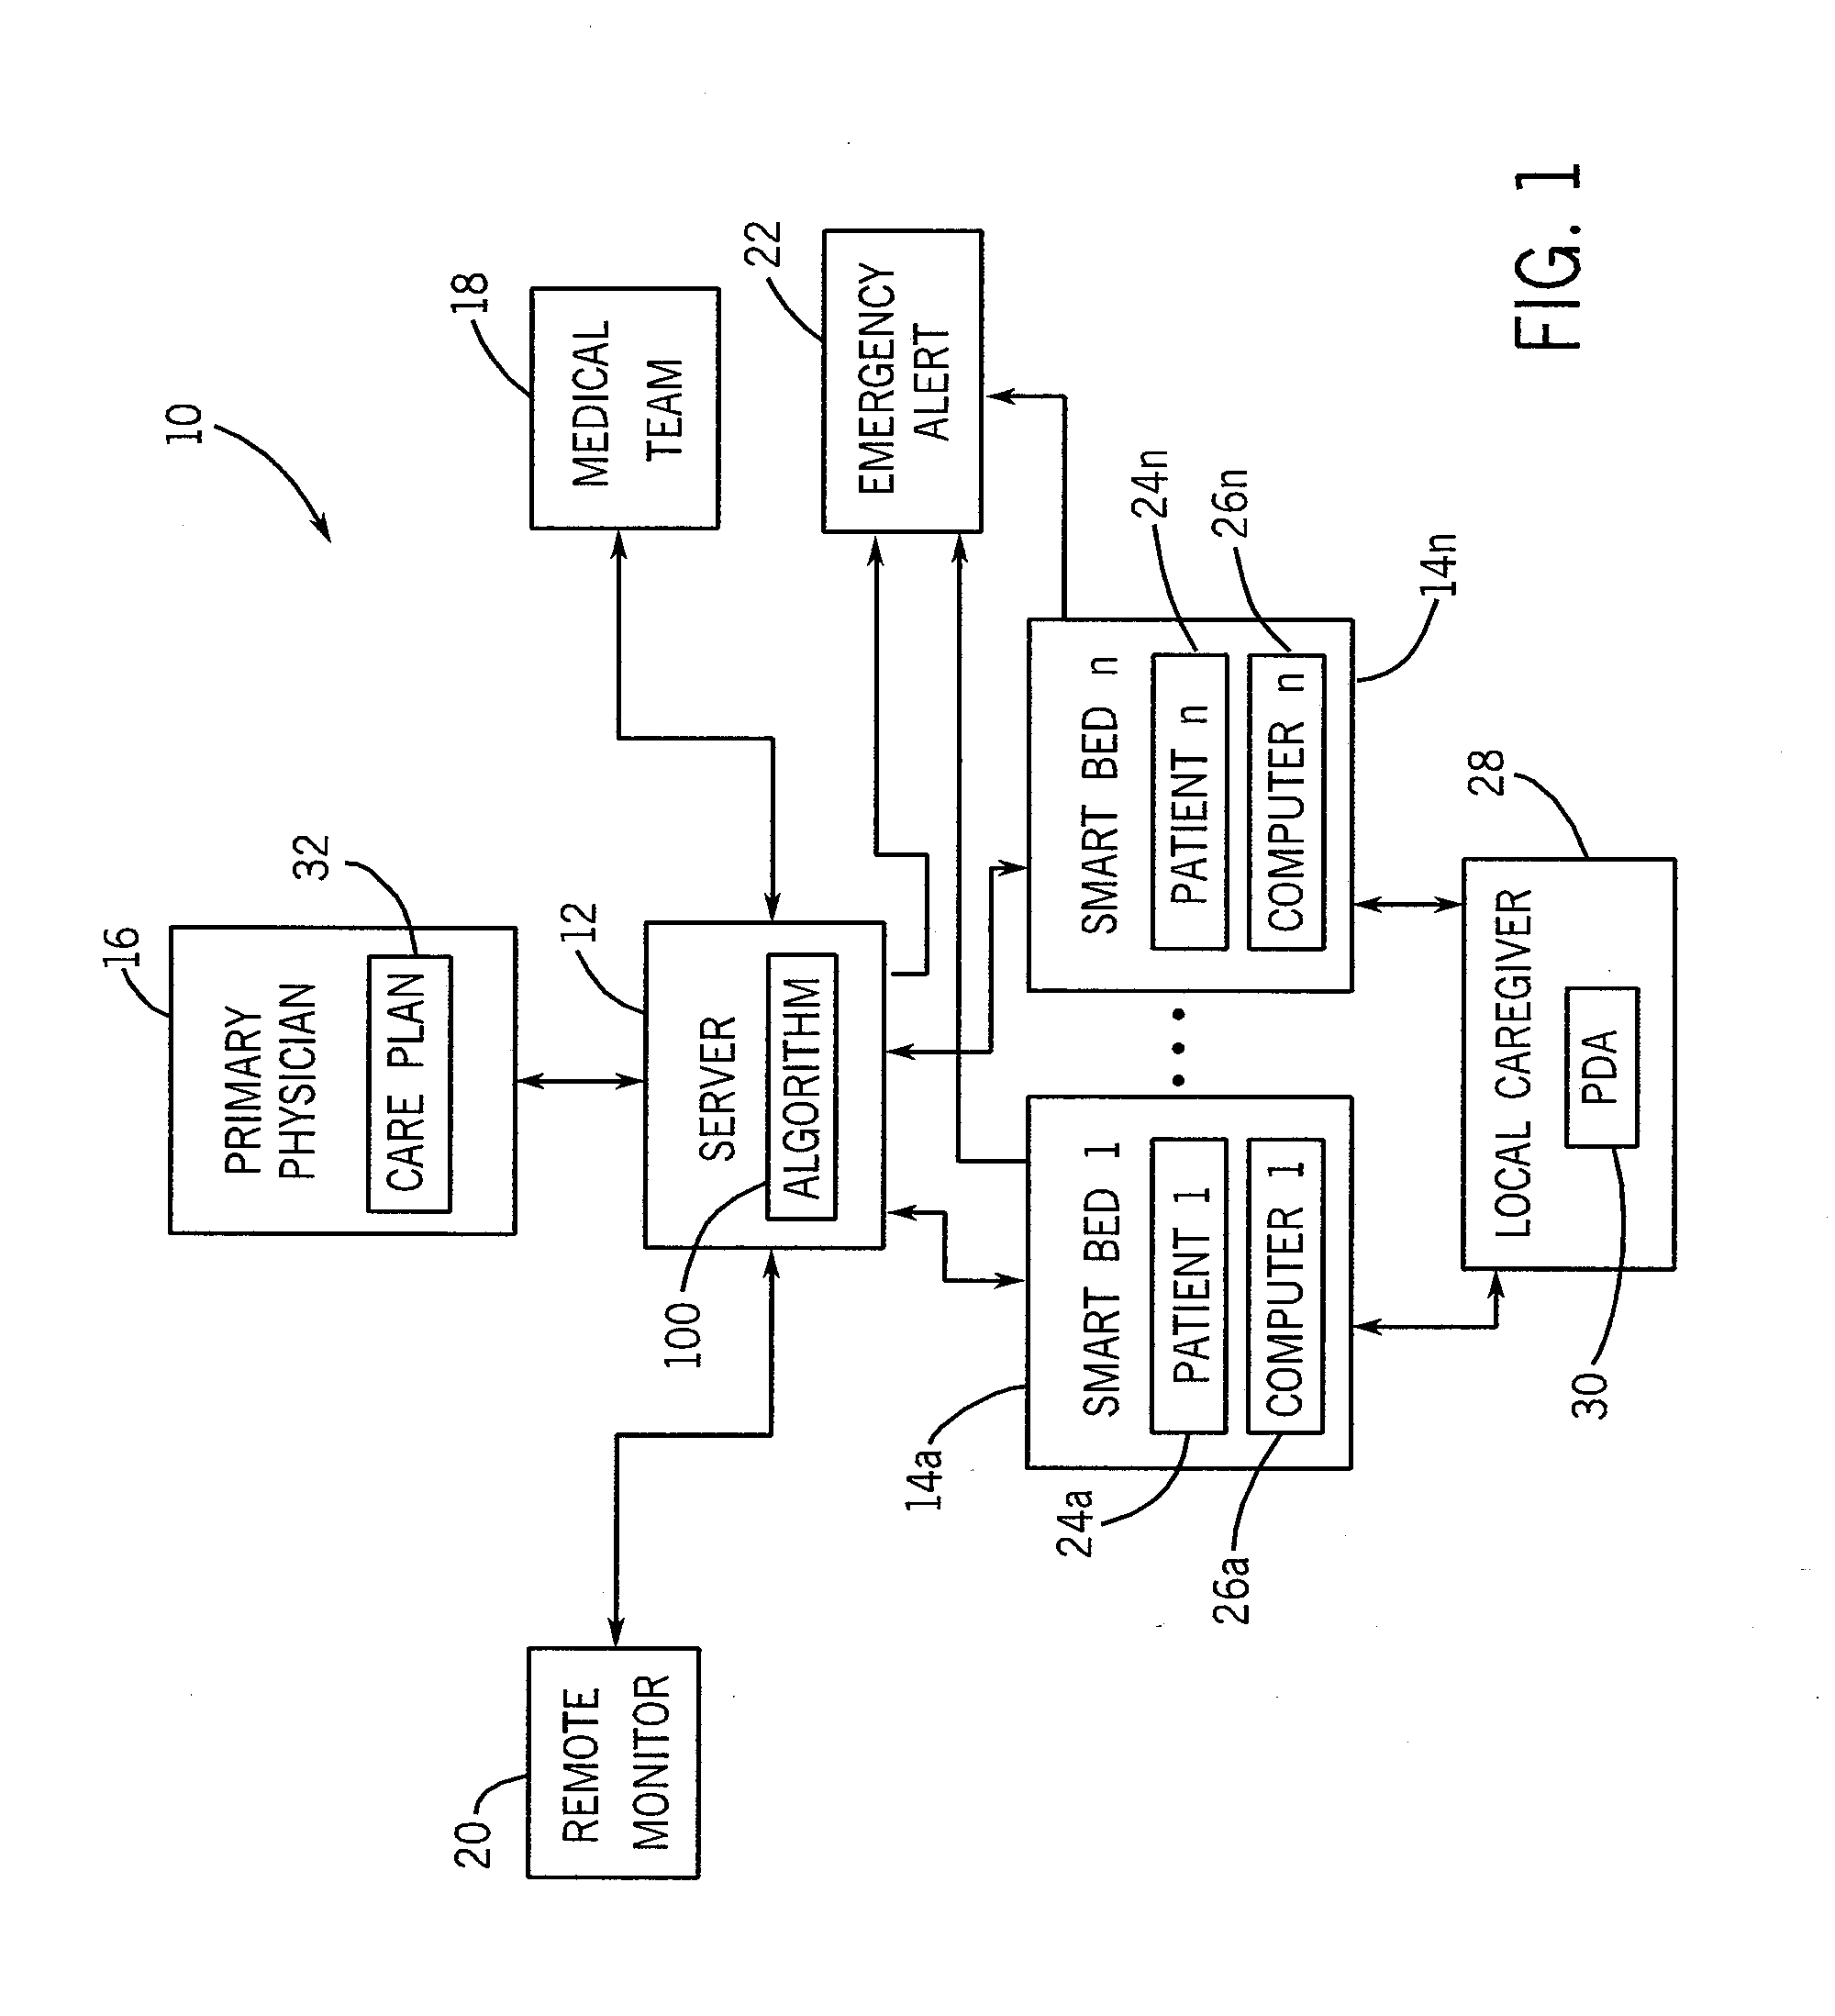 Smart bed system and apparatus